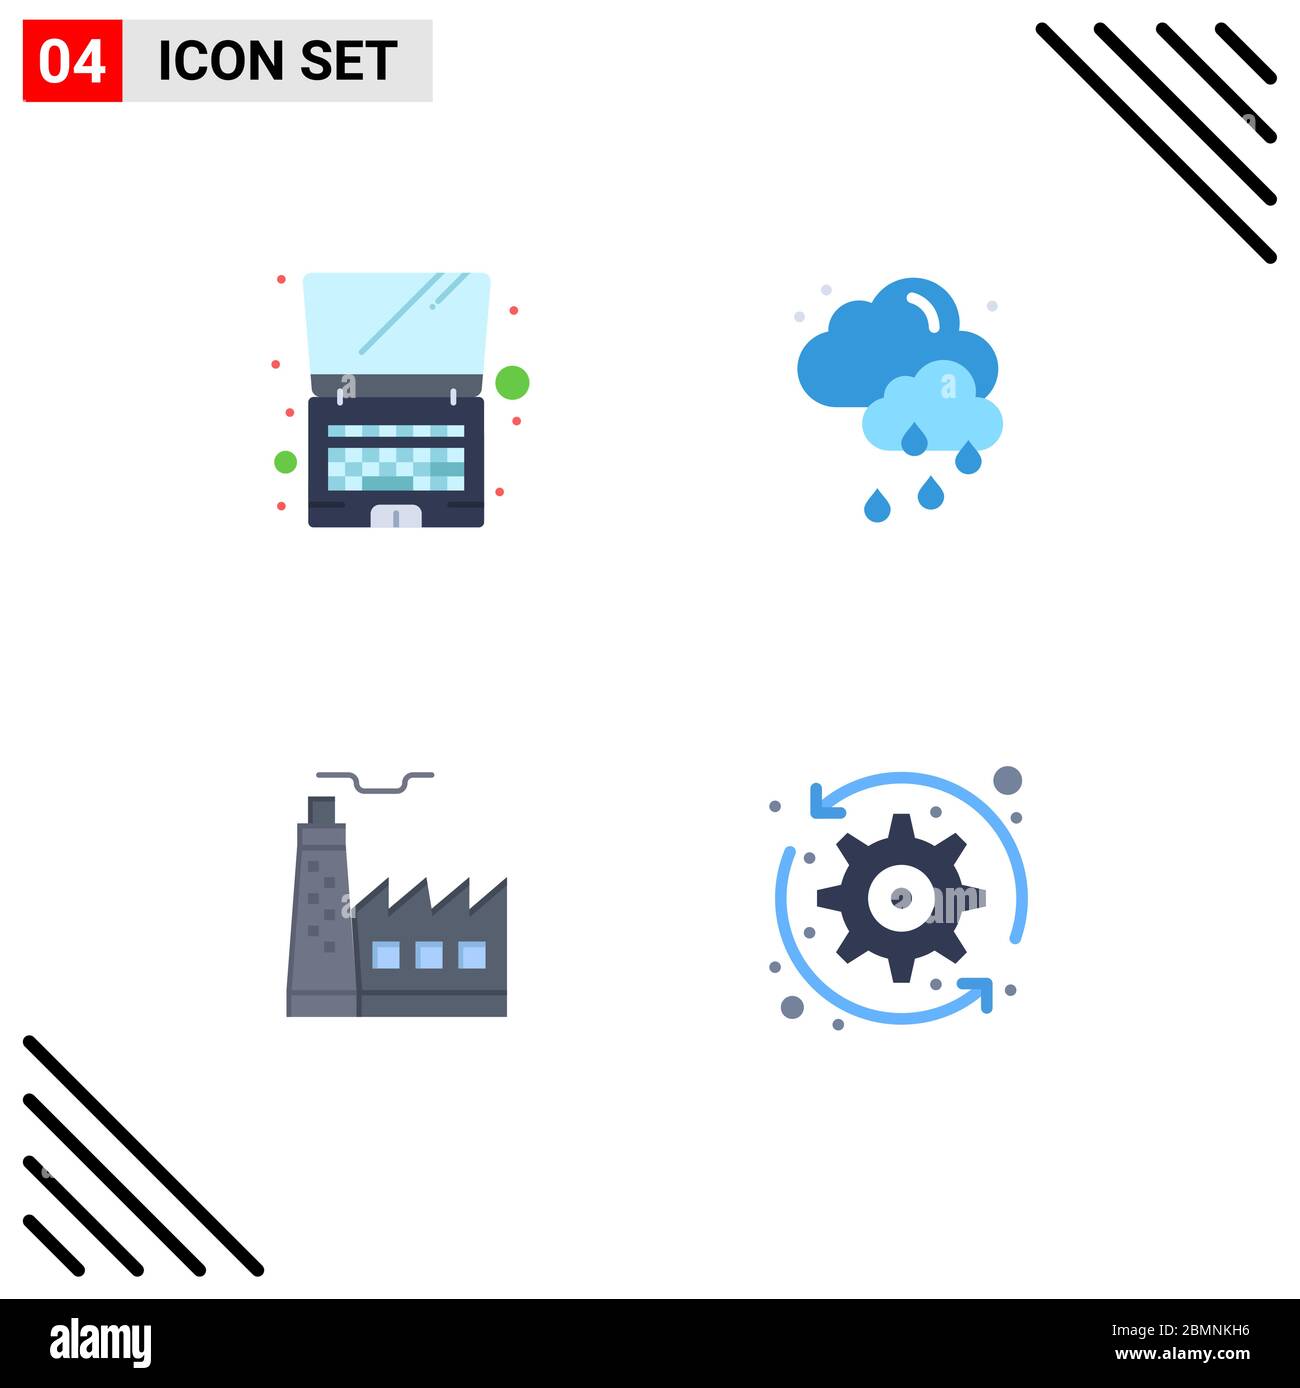 Mobile Interface Flat Icon Set of 4 Pictograms of computer, industrey, cloud, building, refresh Editable Vector Design Elements Stock Vector